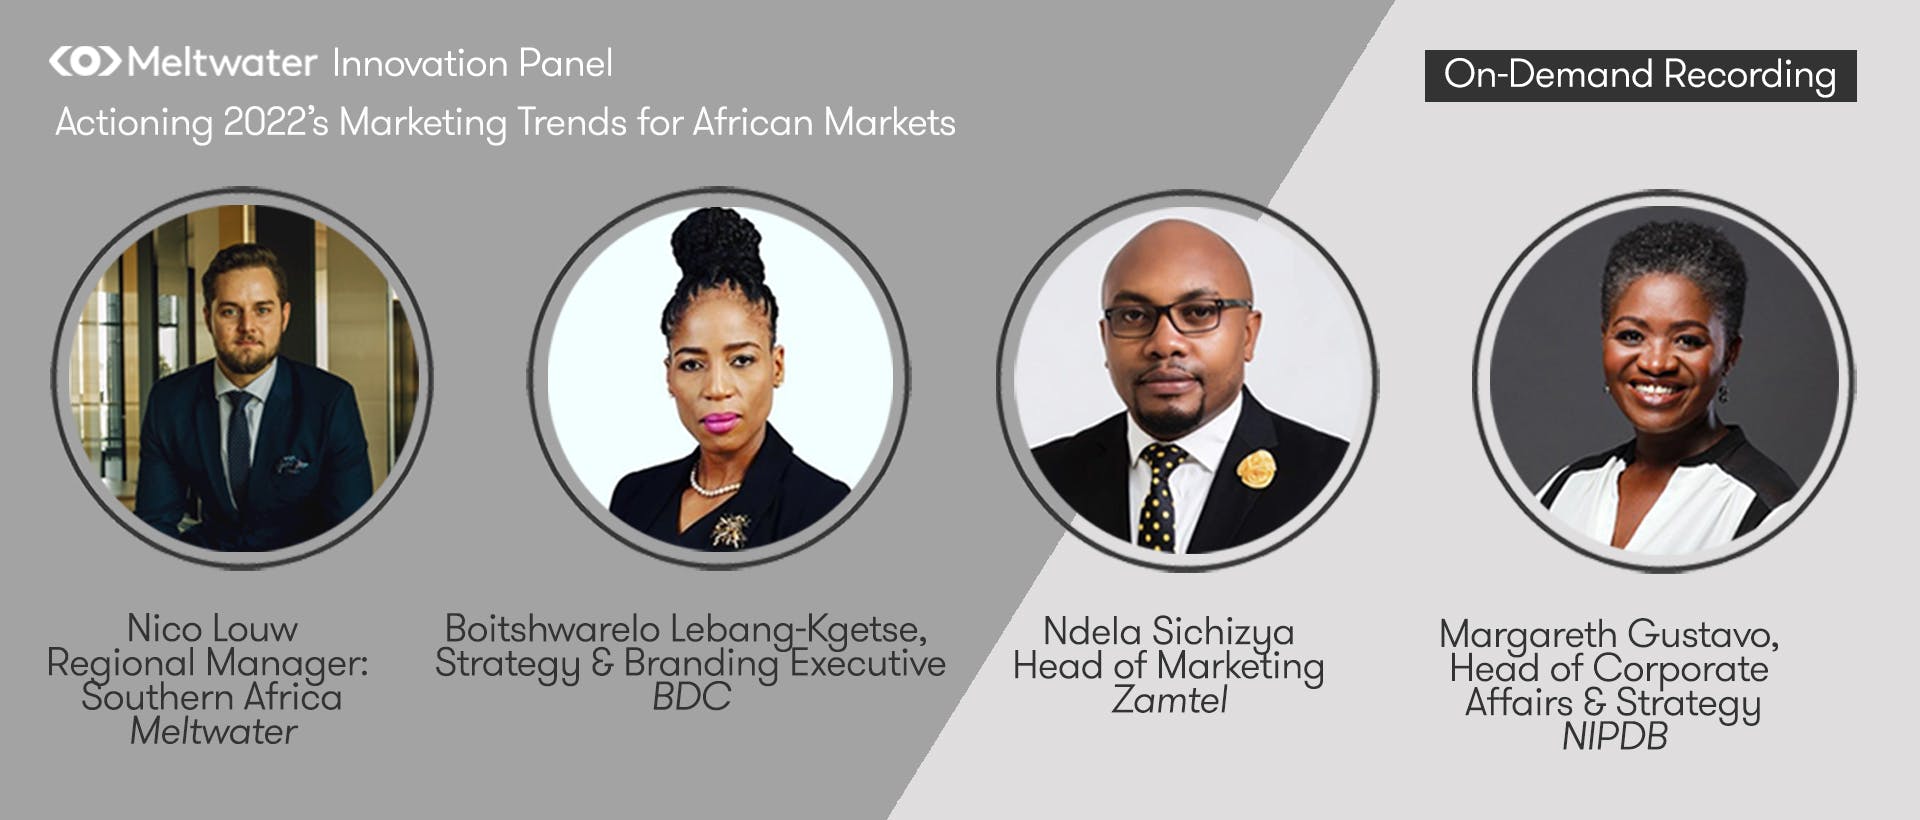 Meltwater Innovation Panel: 2022 Marketing Trends for African Markets - On Demand Recording